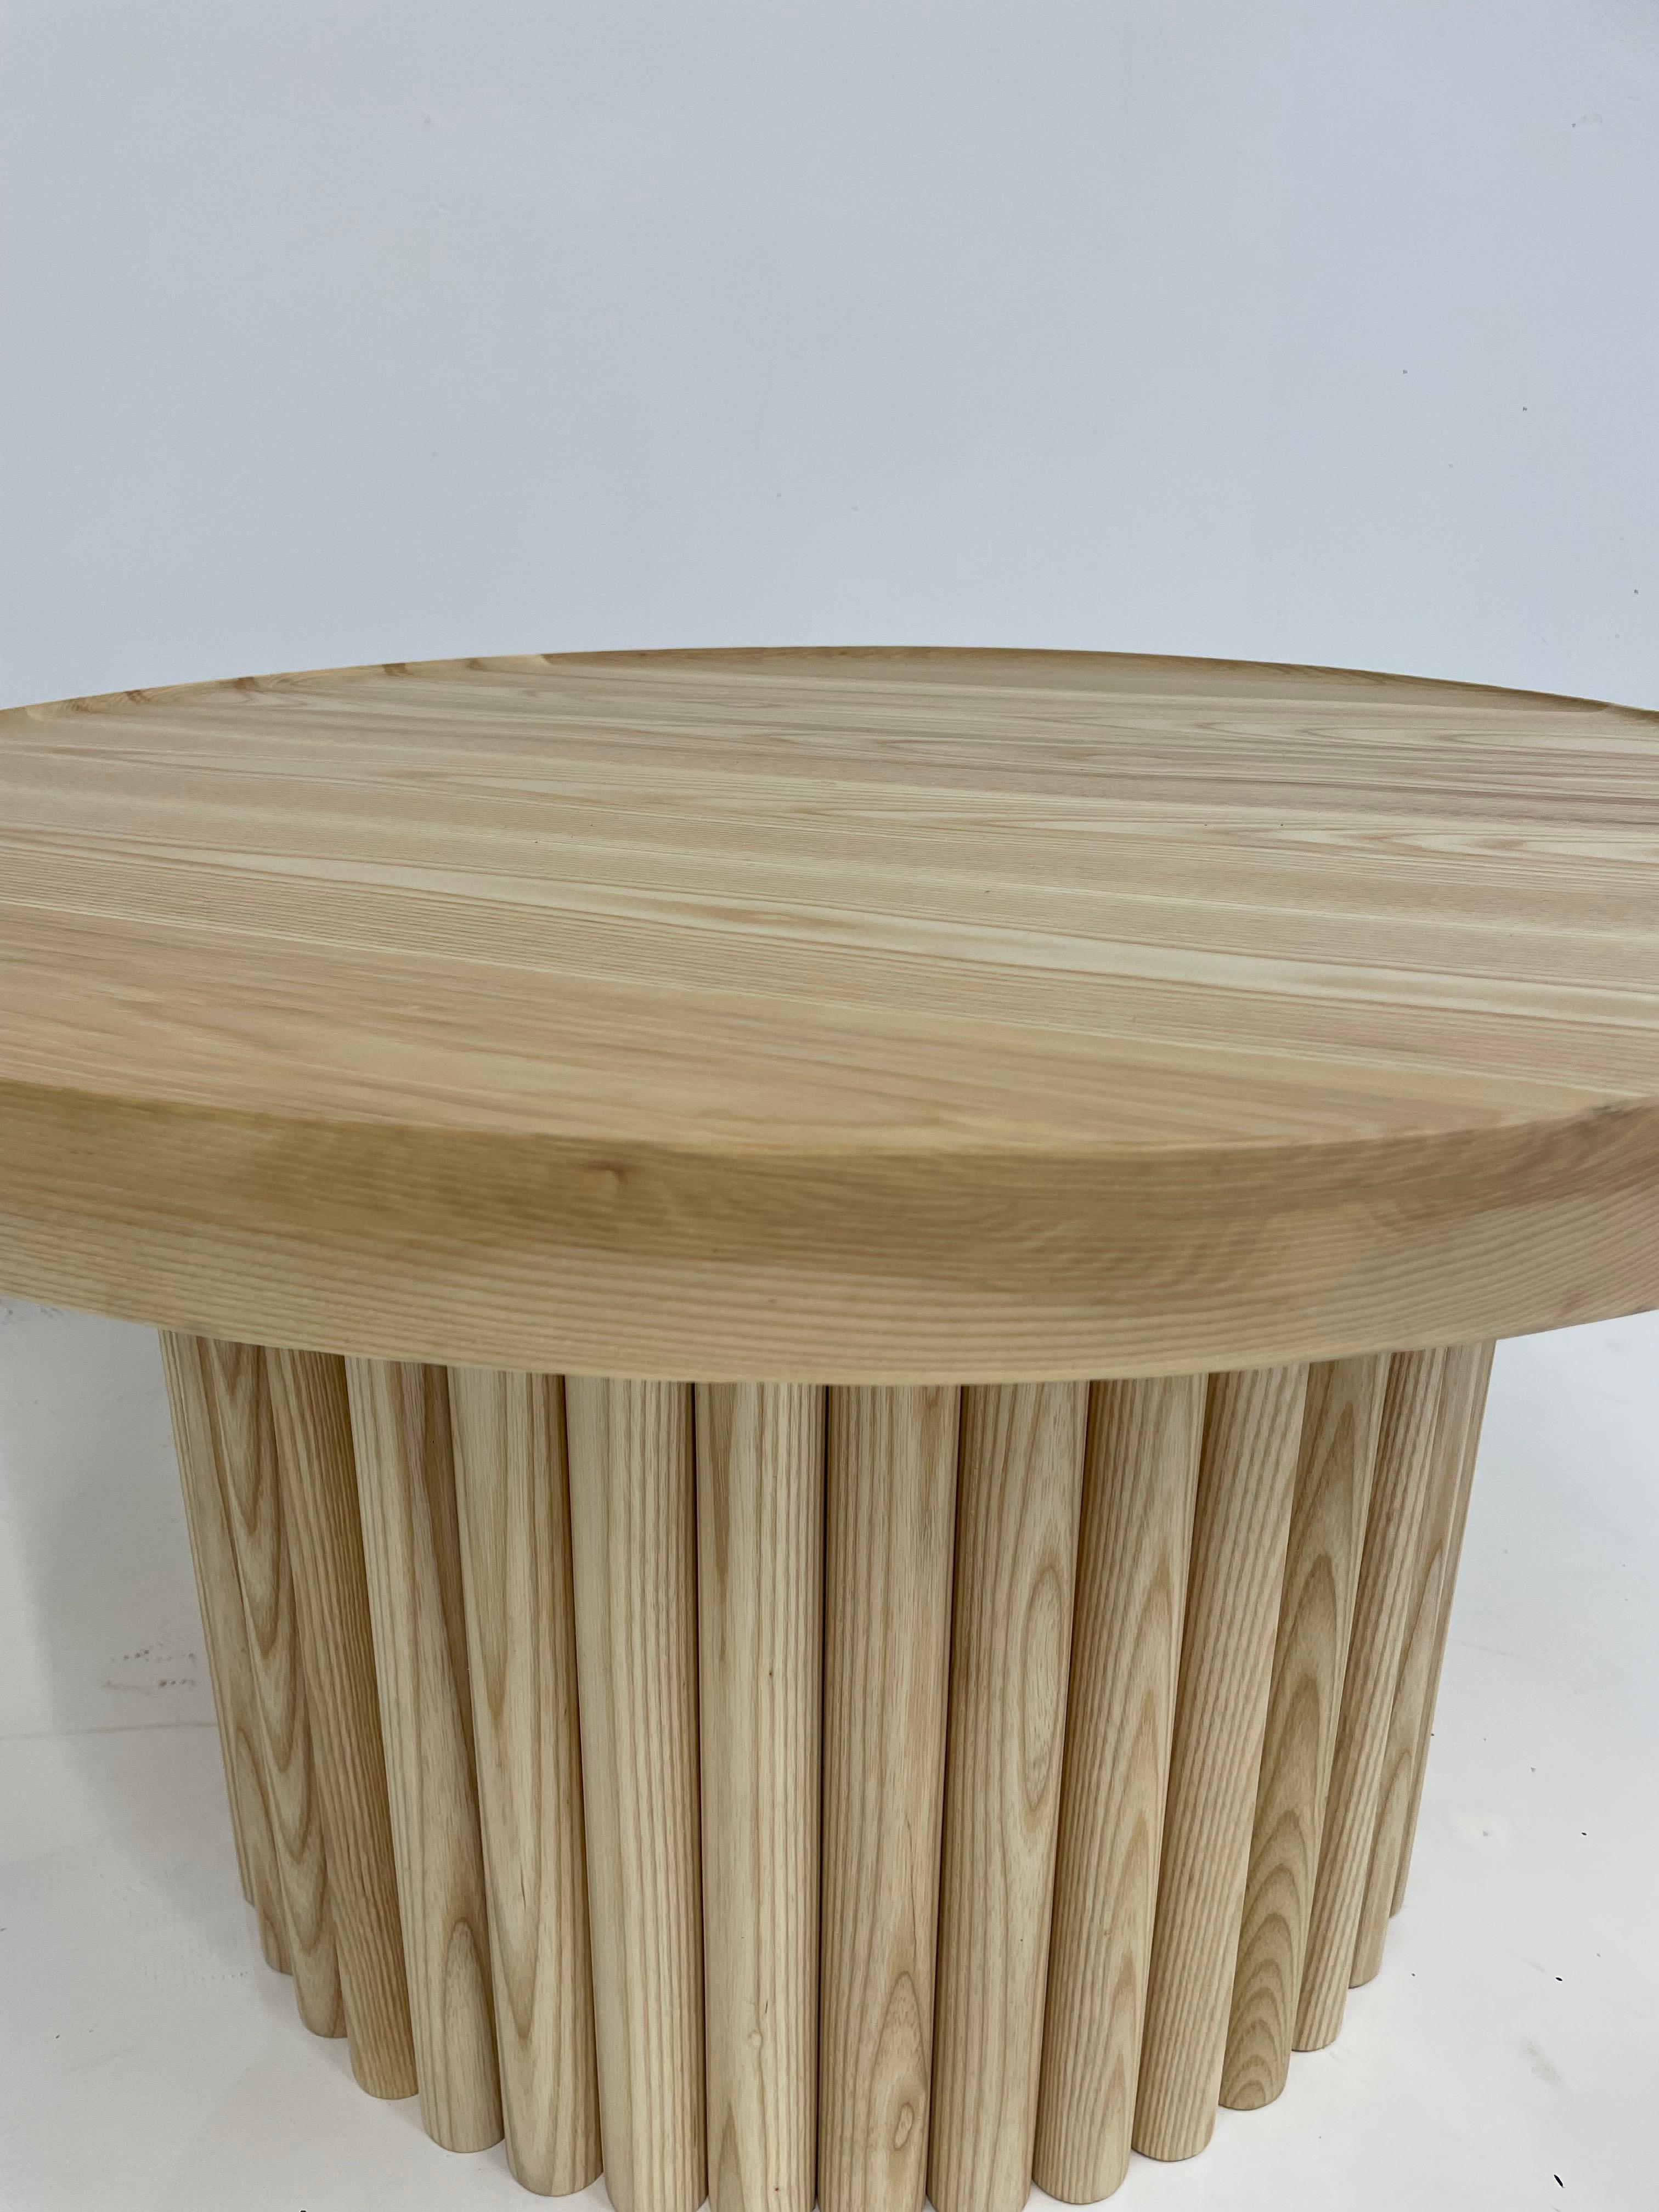 Hand-Crafted Modern White Oak Loki Coffee Table from the Signature Series by Pompous Fox For Sale